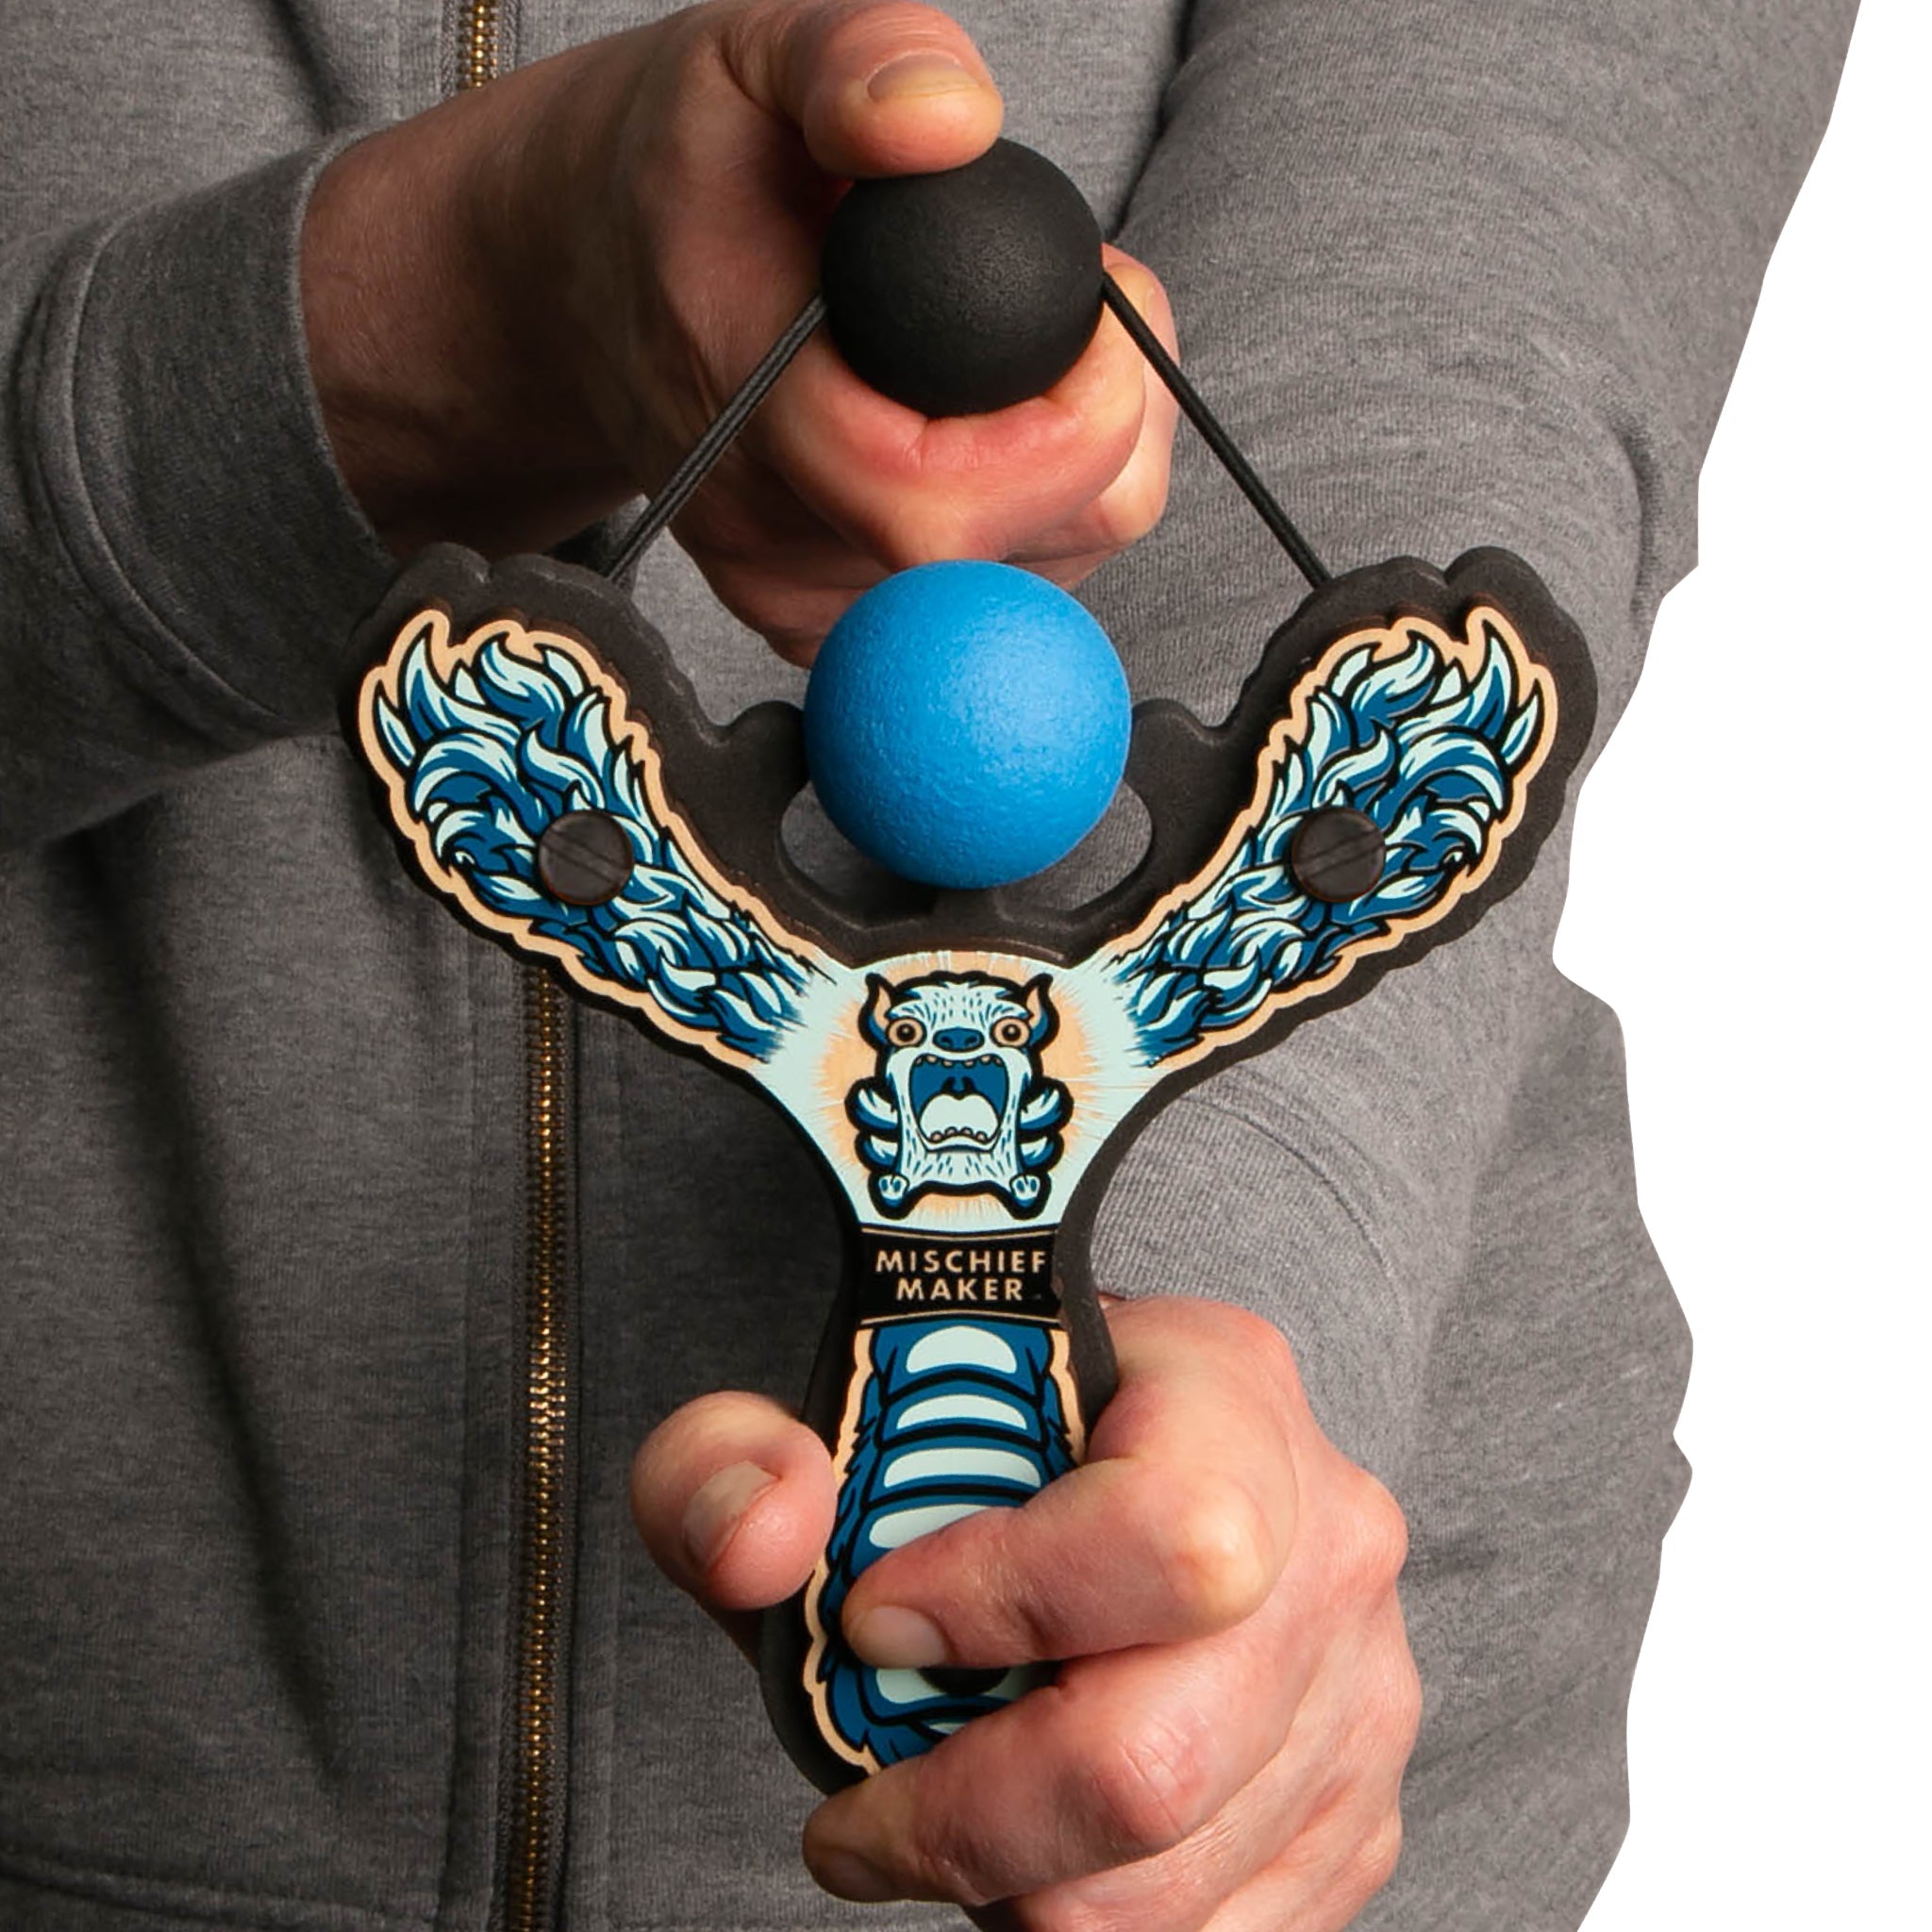 Blue Monster toy slingshot being shot by 6 year old boy. Mischief Maker by Mighty Fun!